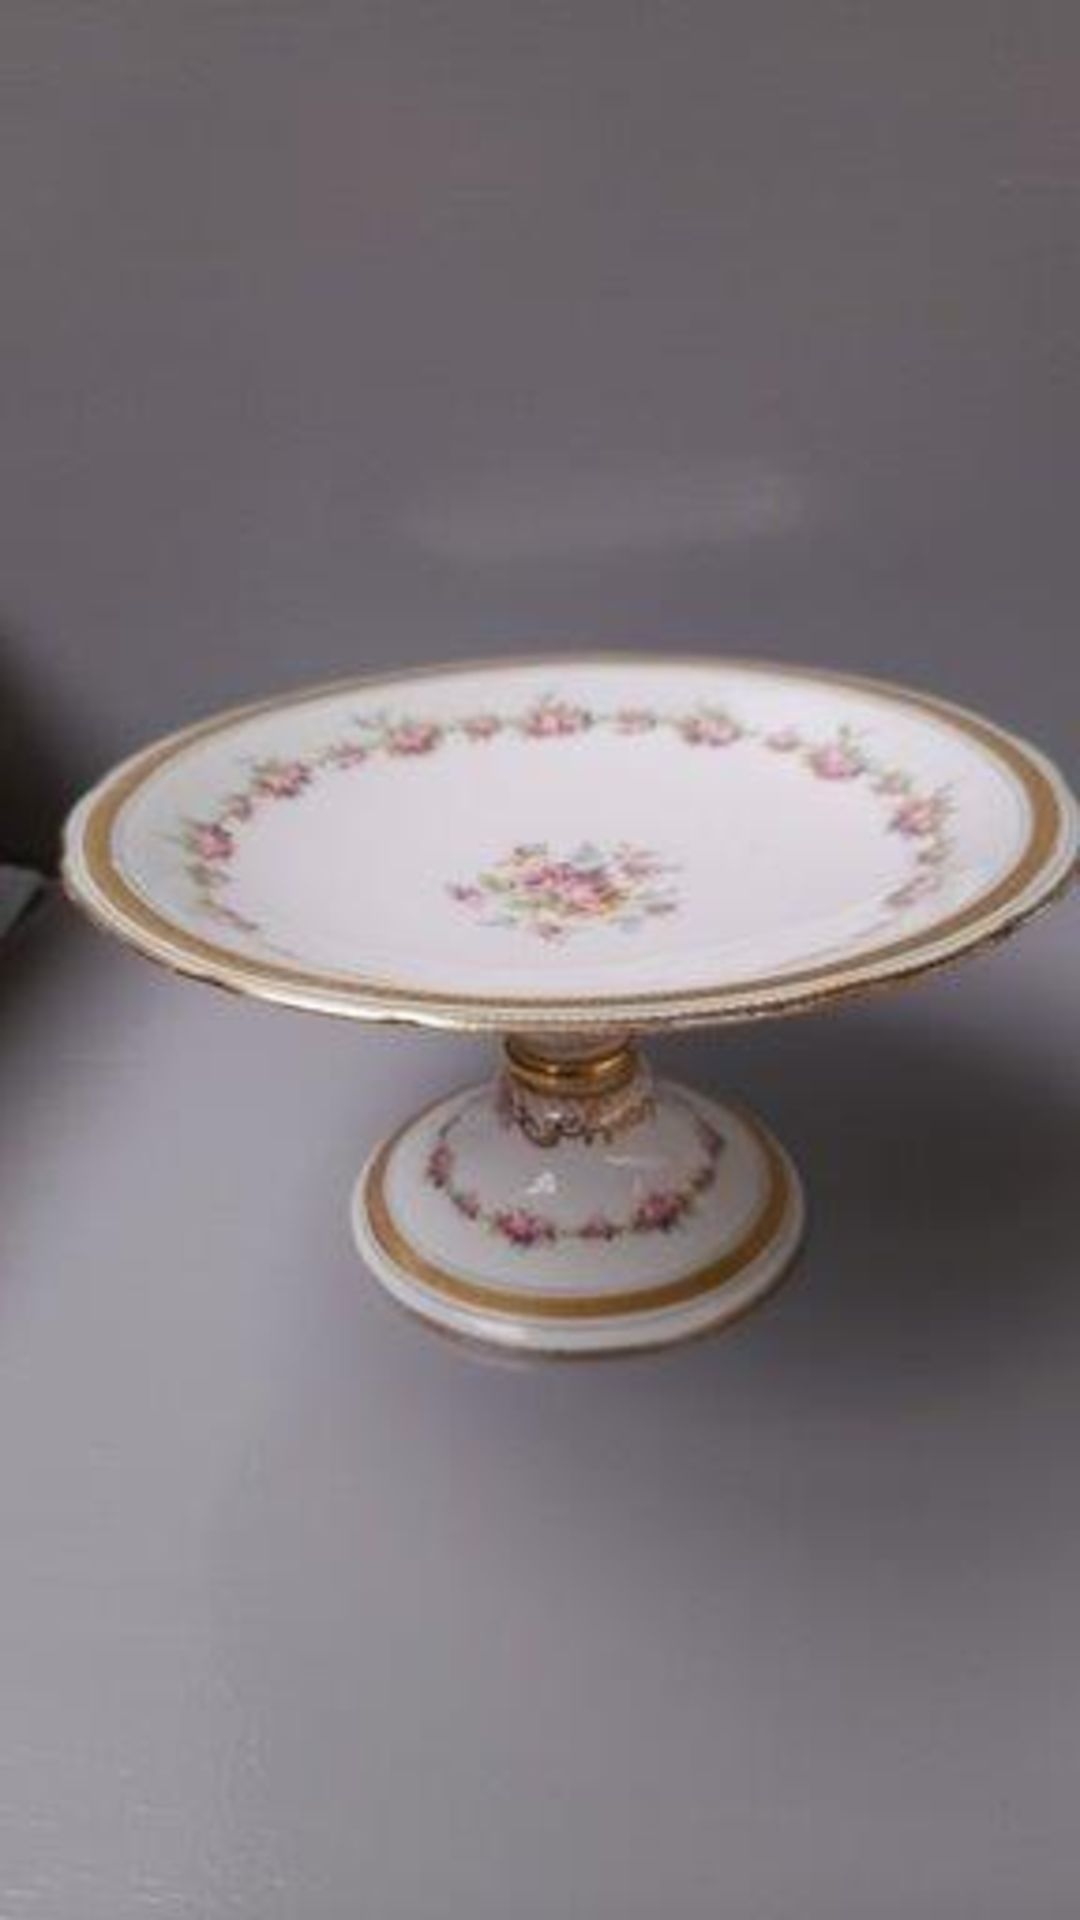 14Pc Victorian Dessert Plates & Cake Stand - Image 2 of 3